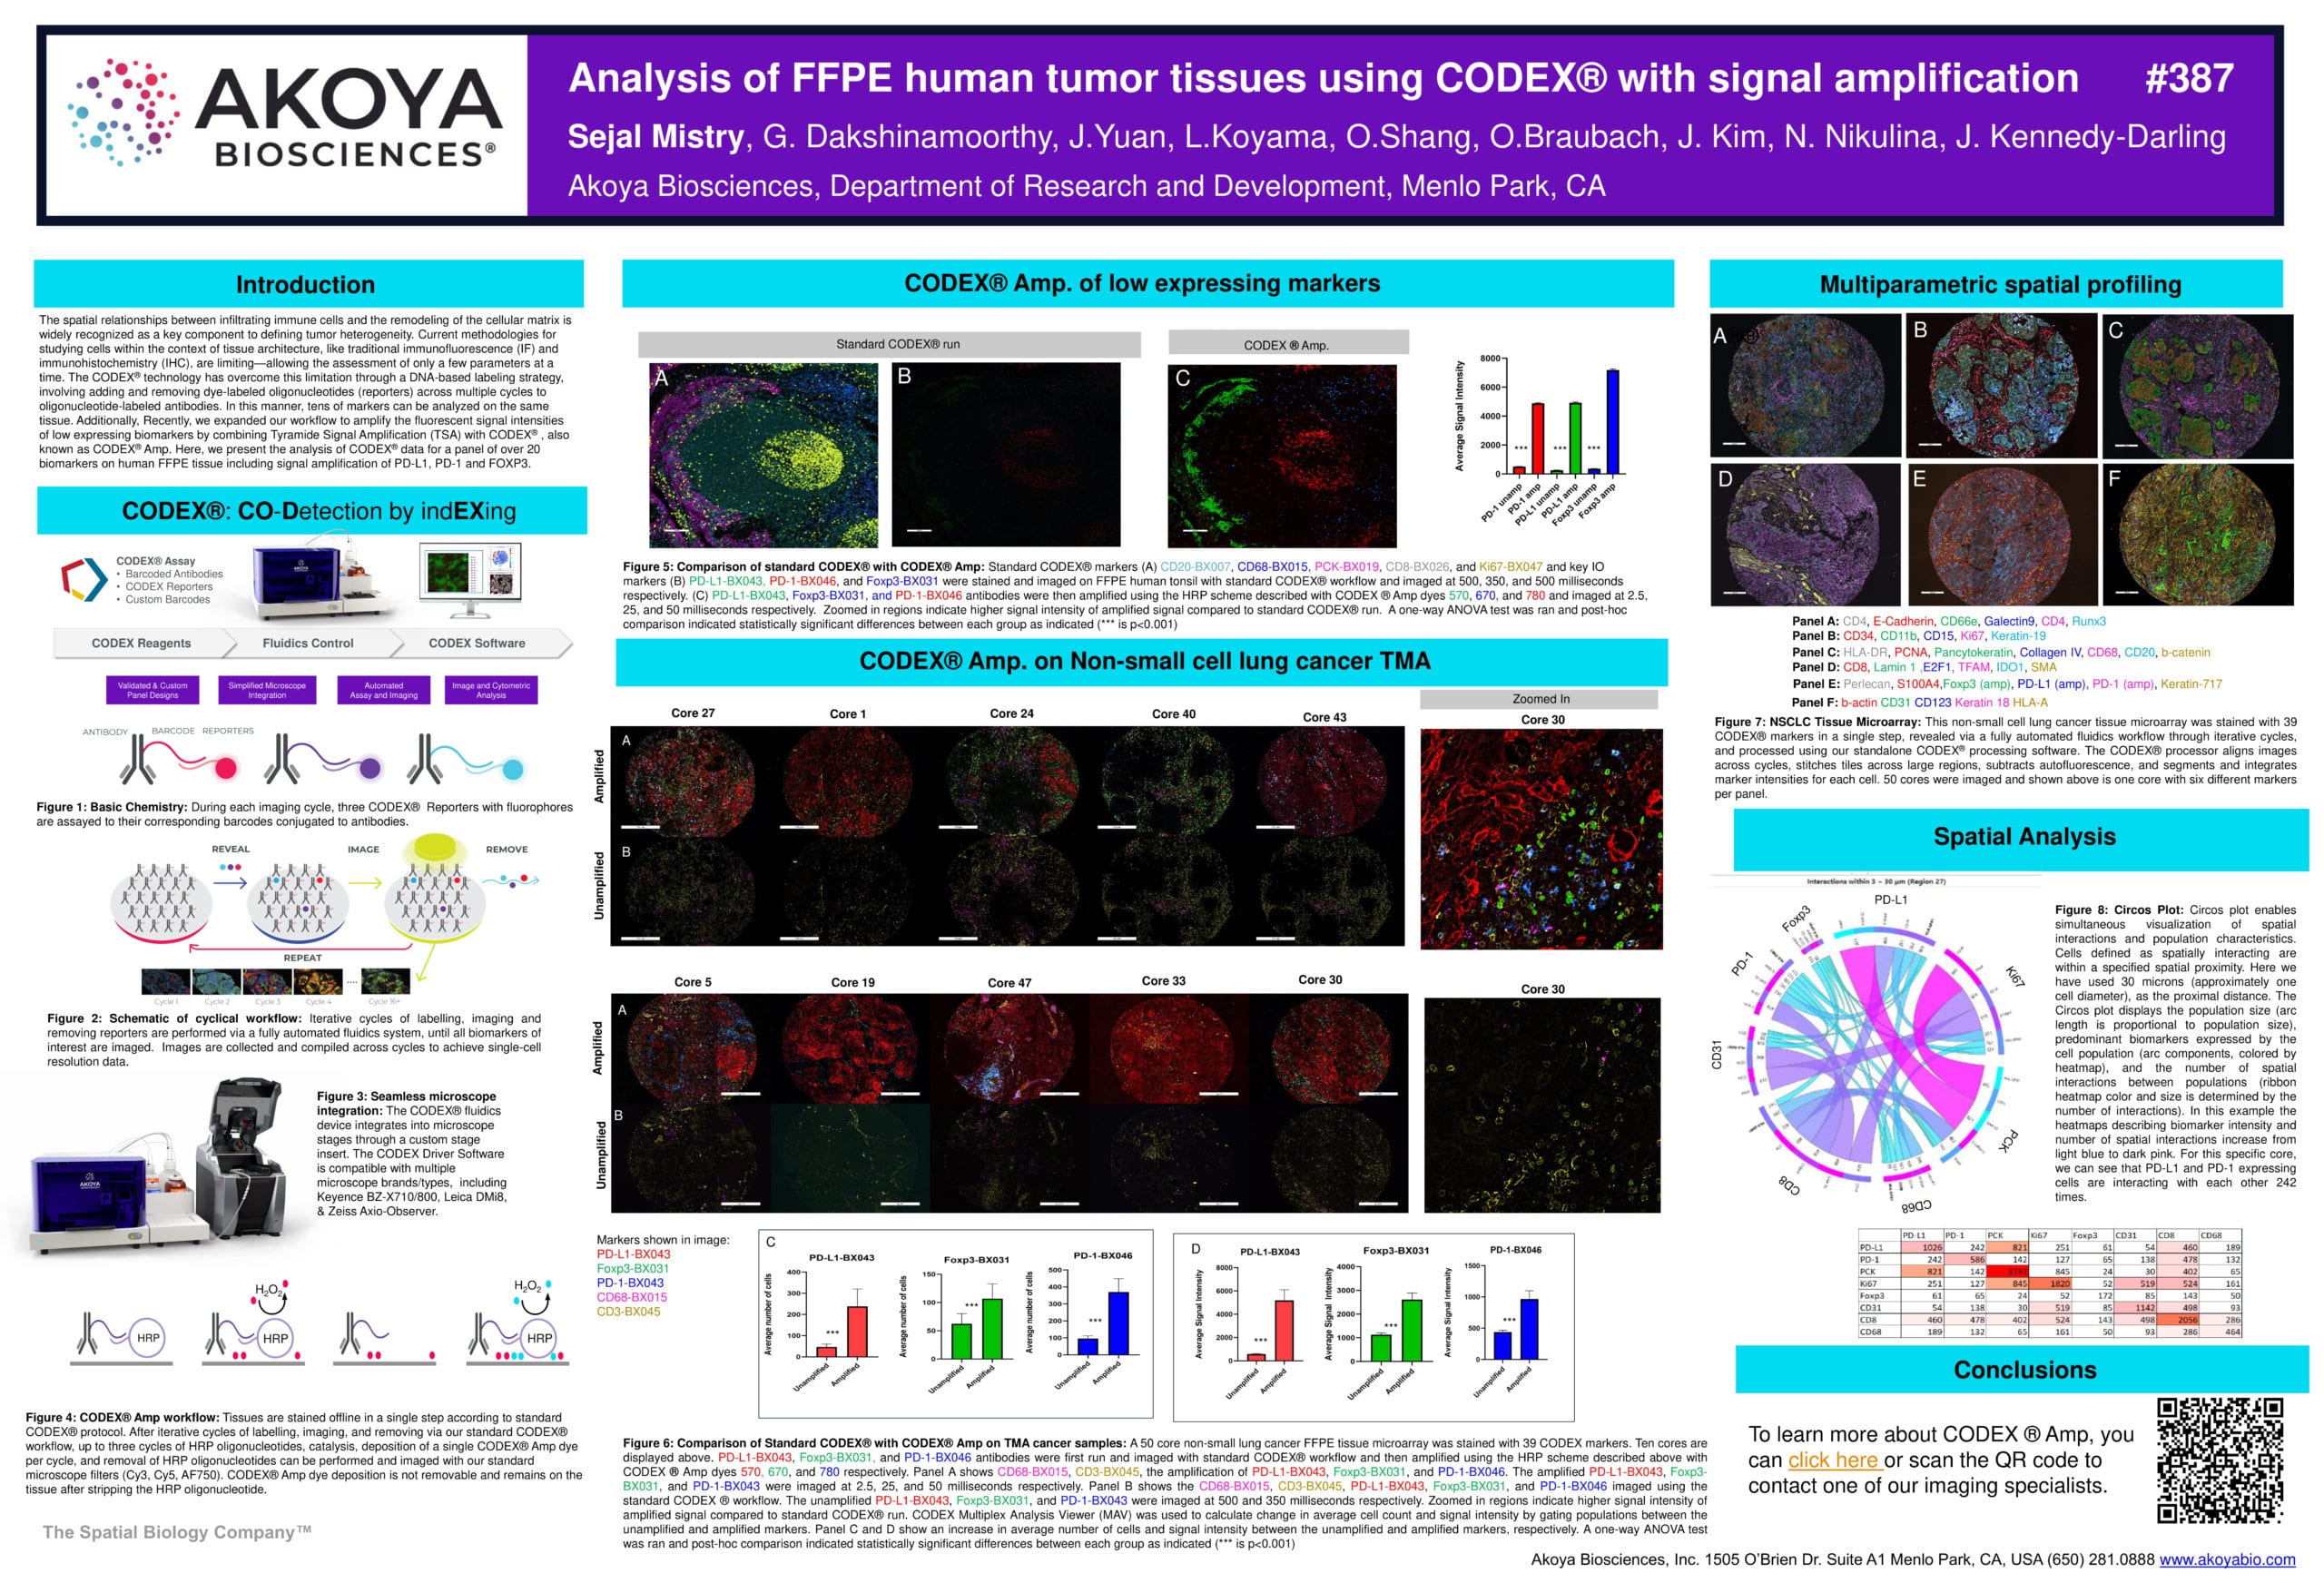 Poster: Analysis of FFPE human tumor tissues using CODEX® with signal amplification